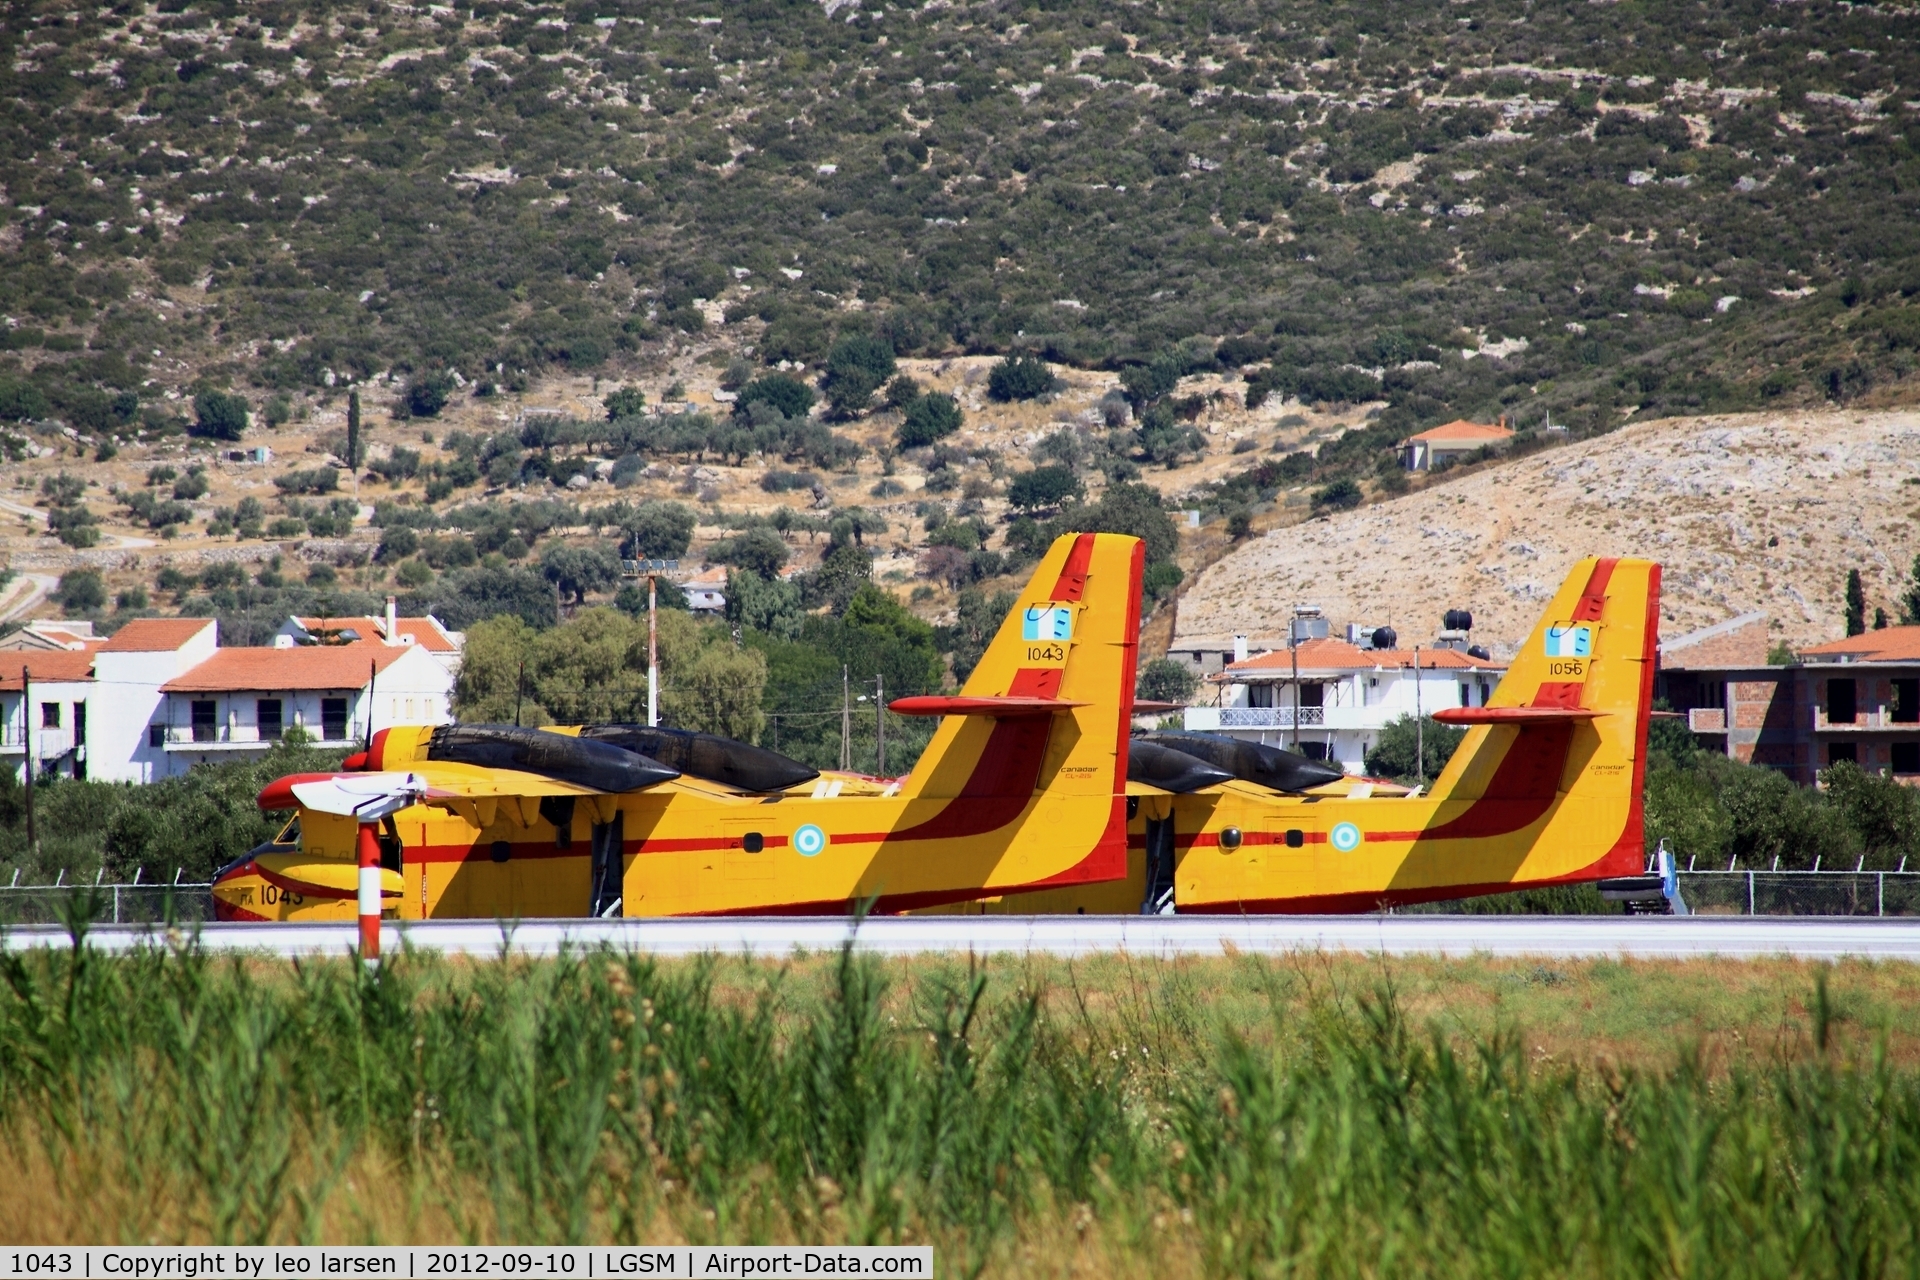 1043, Canadair CL-215-II (CL-215-1A10) C/N 1043, Samos 10.9.2012 together with 1056